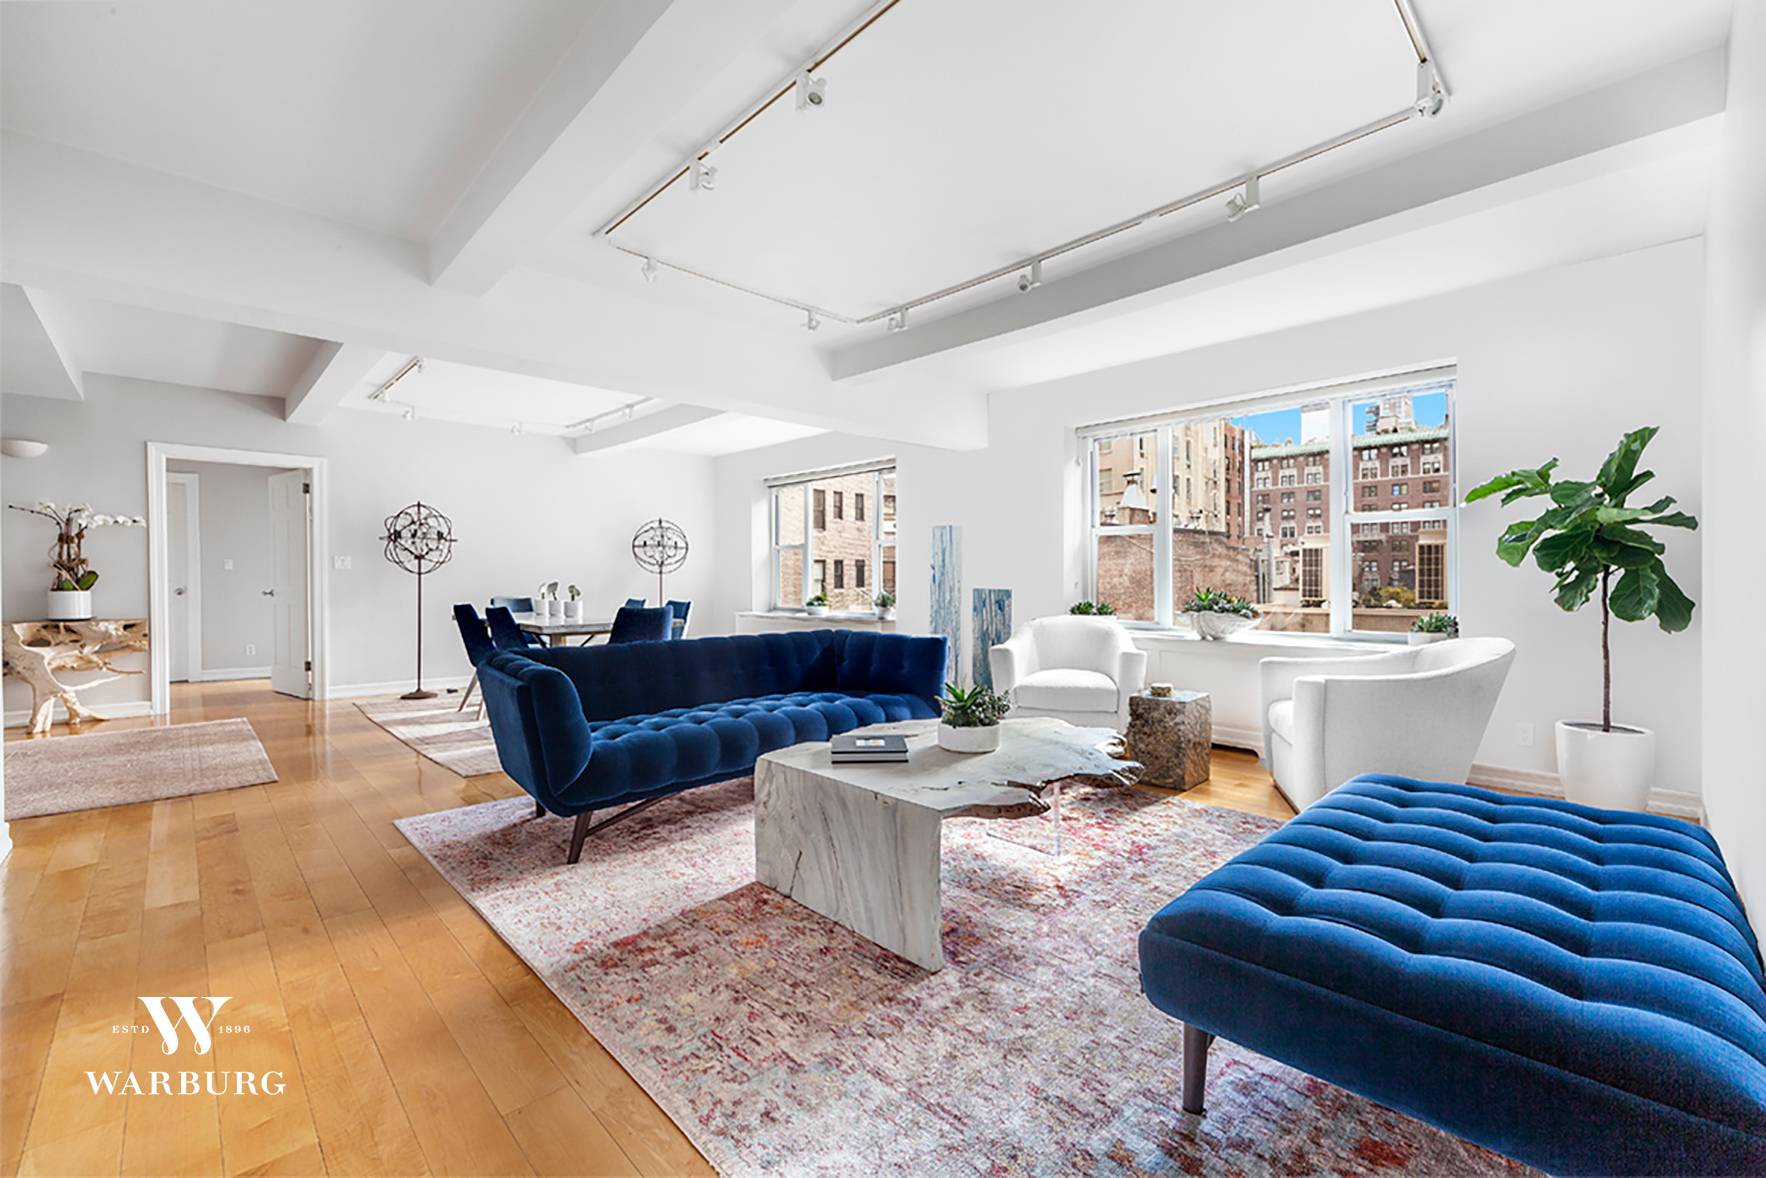 Here's a rare opportunity to live just steps away from Central Park in a gorgeous 1939 art deco condominium designed by the renowned architect Rosario Candela.